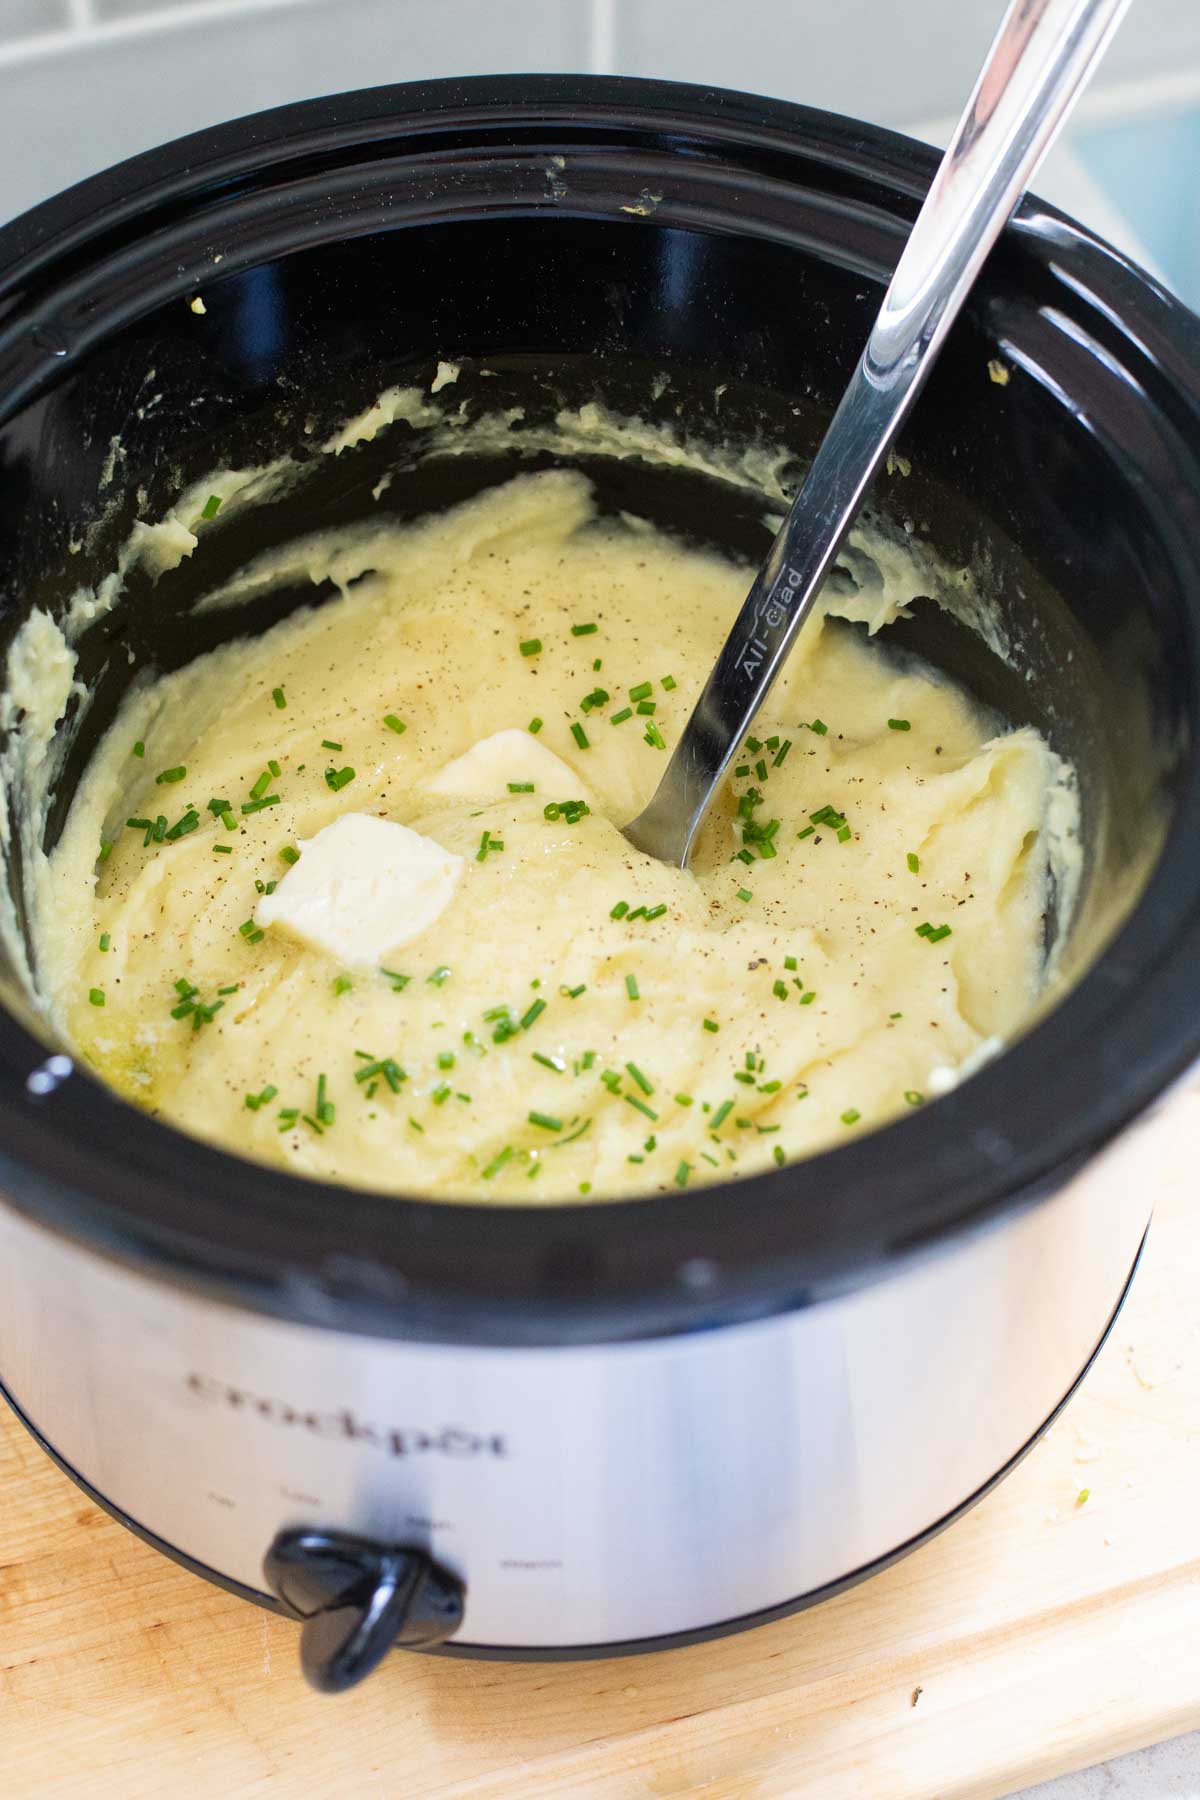 The finished mashed potatoes are in the Crockpot with a serving spoon, a pat of butter, and fresh chopped chives.